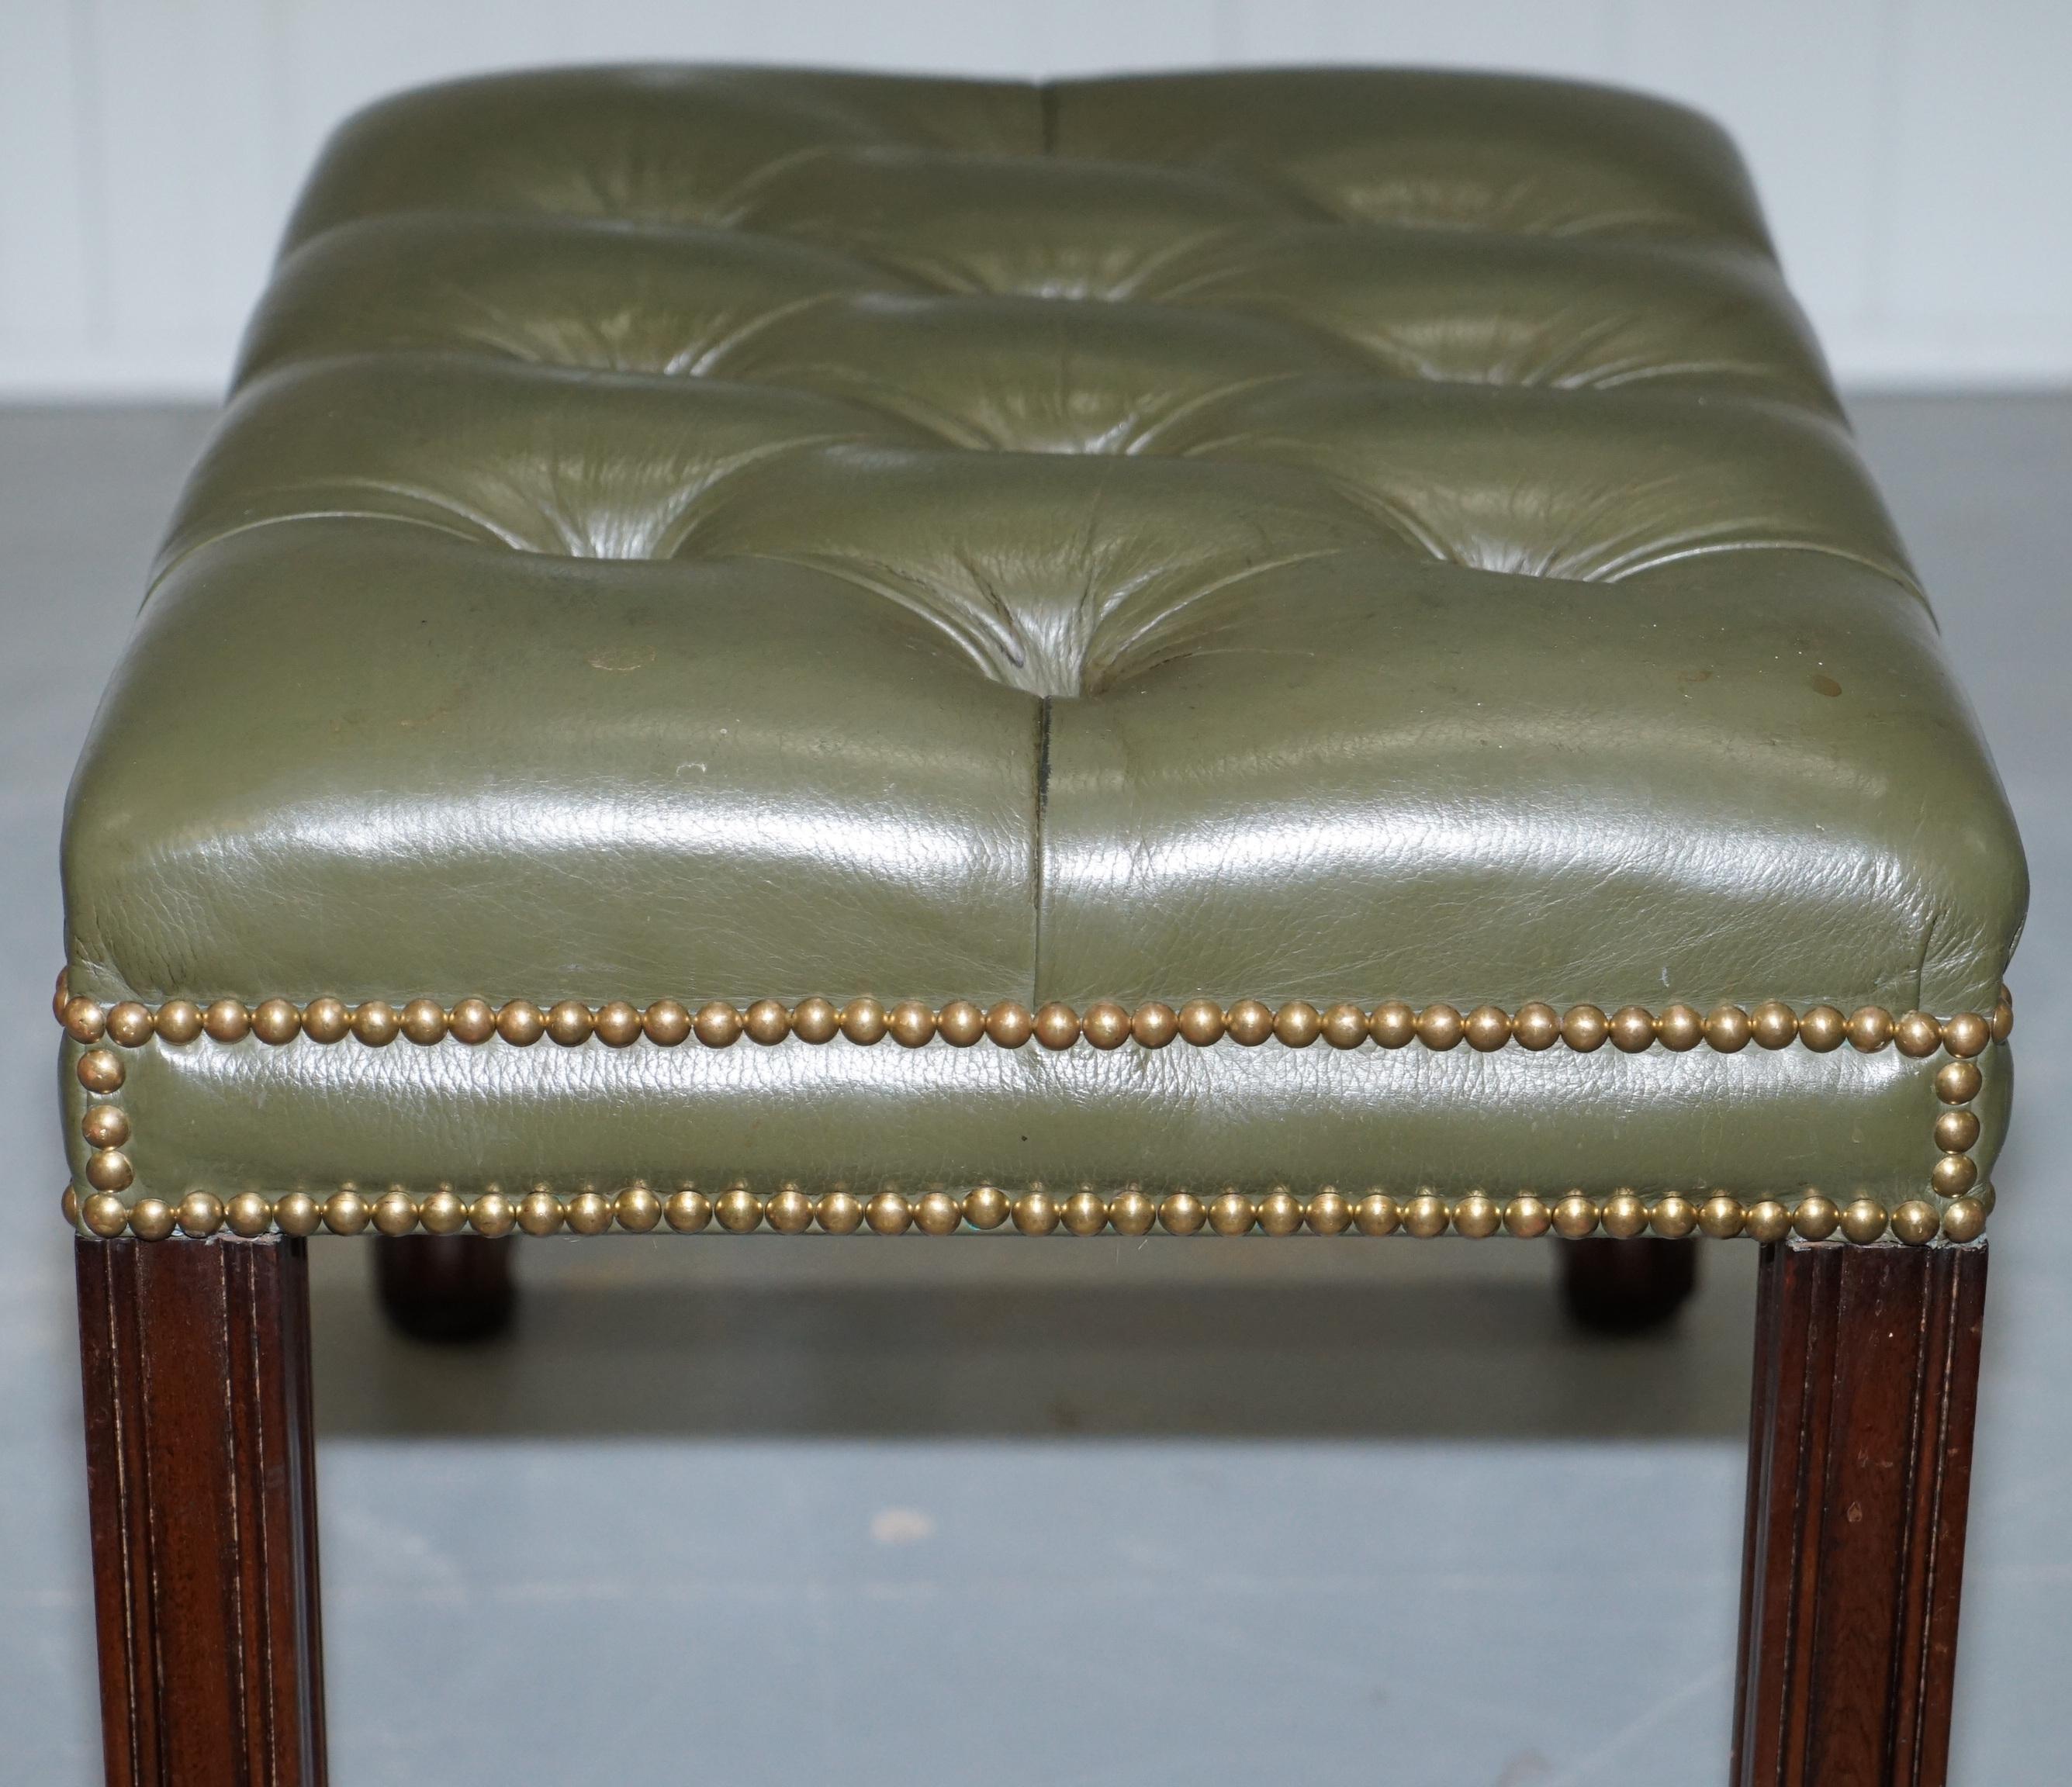 Aged Green Leather Chesterfield Mahogany Framed Footstool for Club Armchairs 1